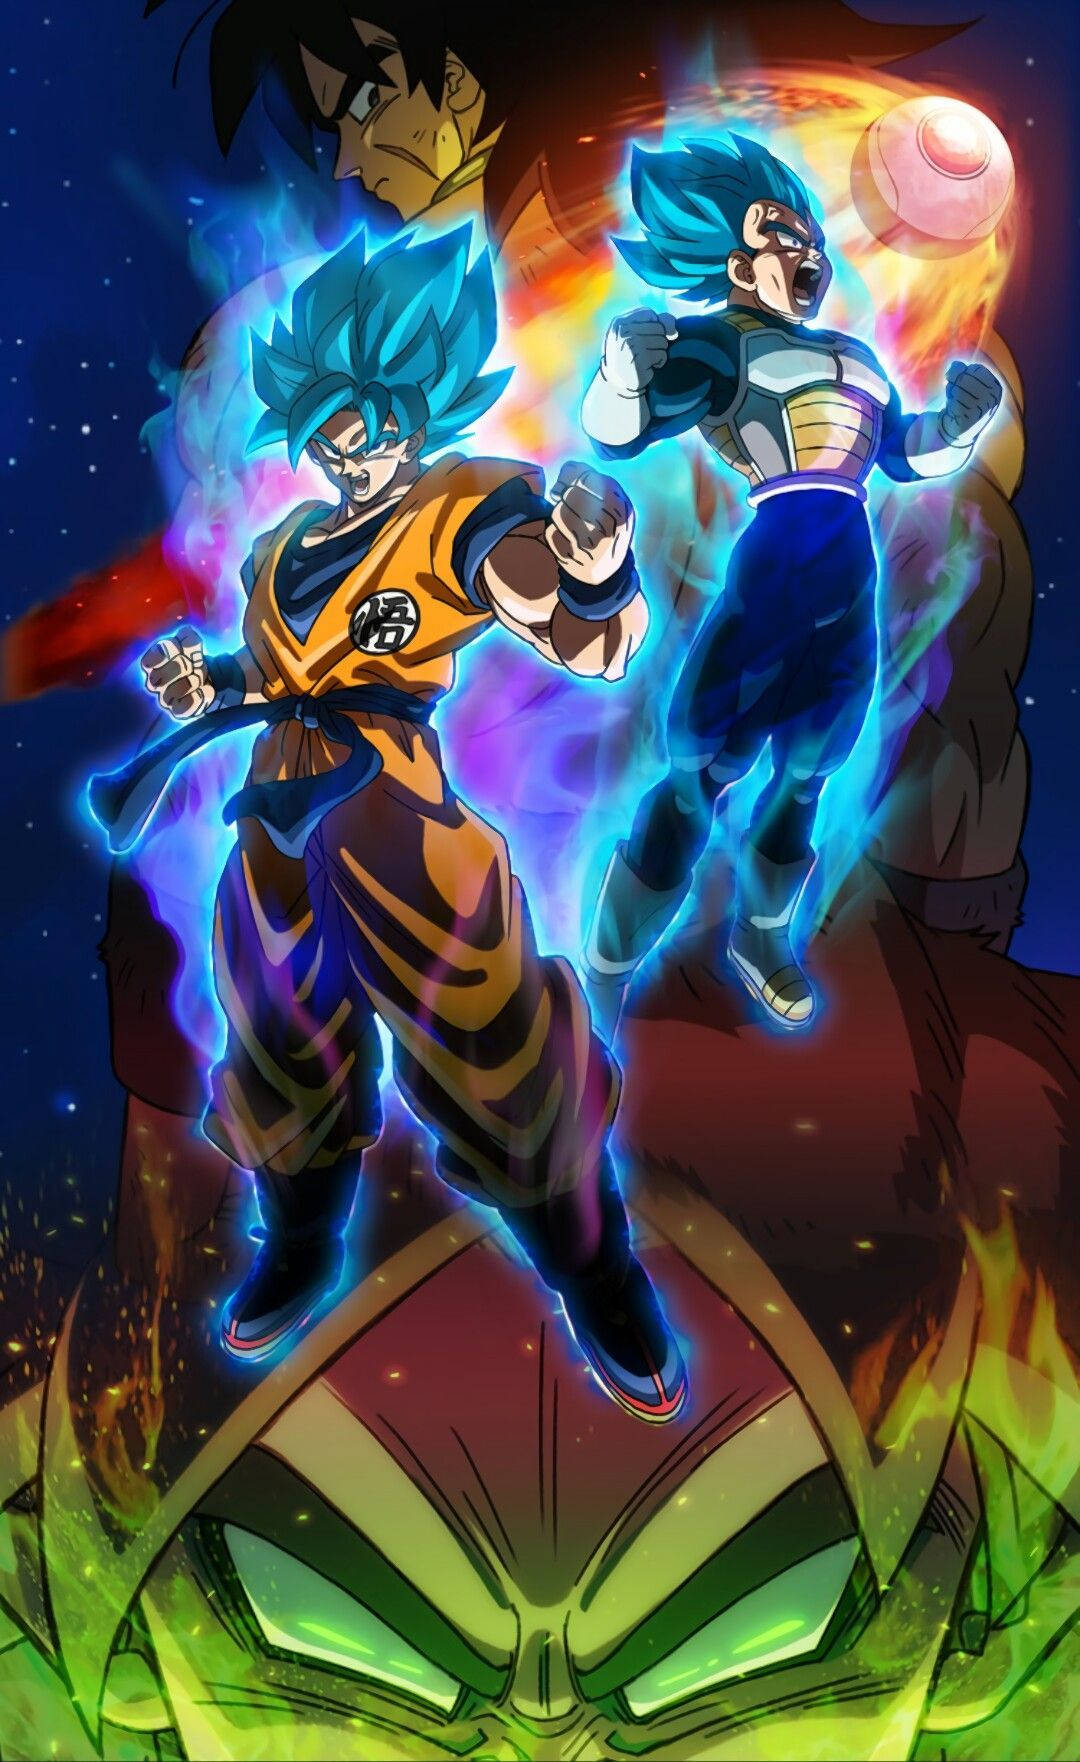 Son Goku In Super Saiyan Blue Mode From The Movie Dragon Ball Super Broly. Wallpaper